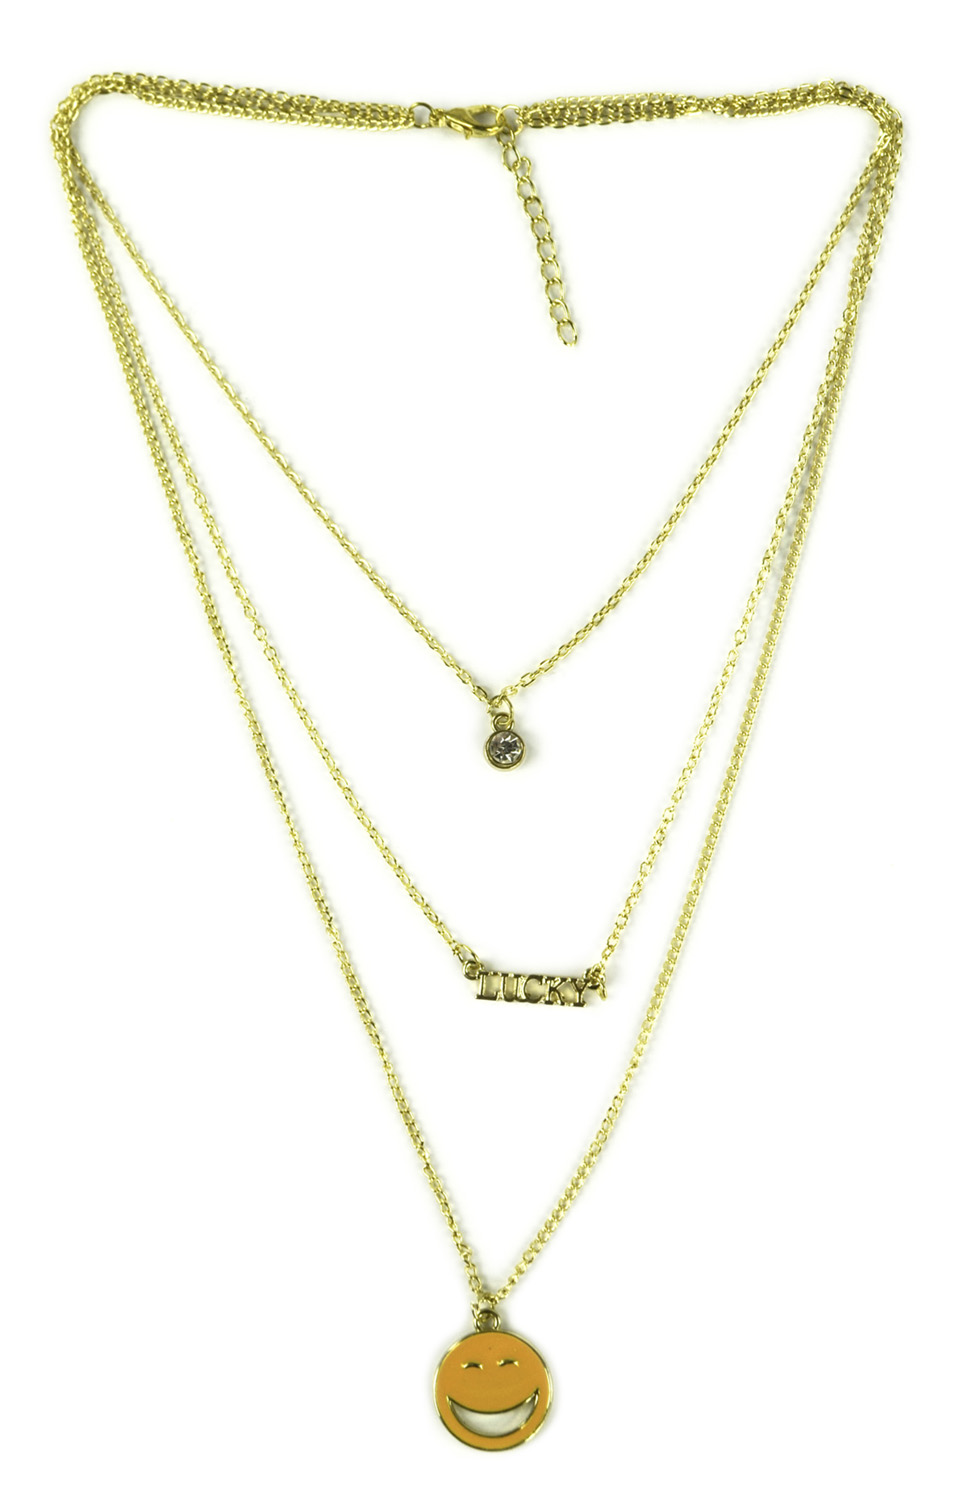 Belle Donne Necklace Long  Multi Chain and Choker  Emoji - Gold